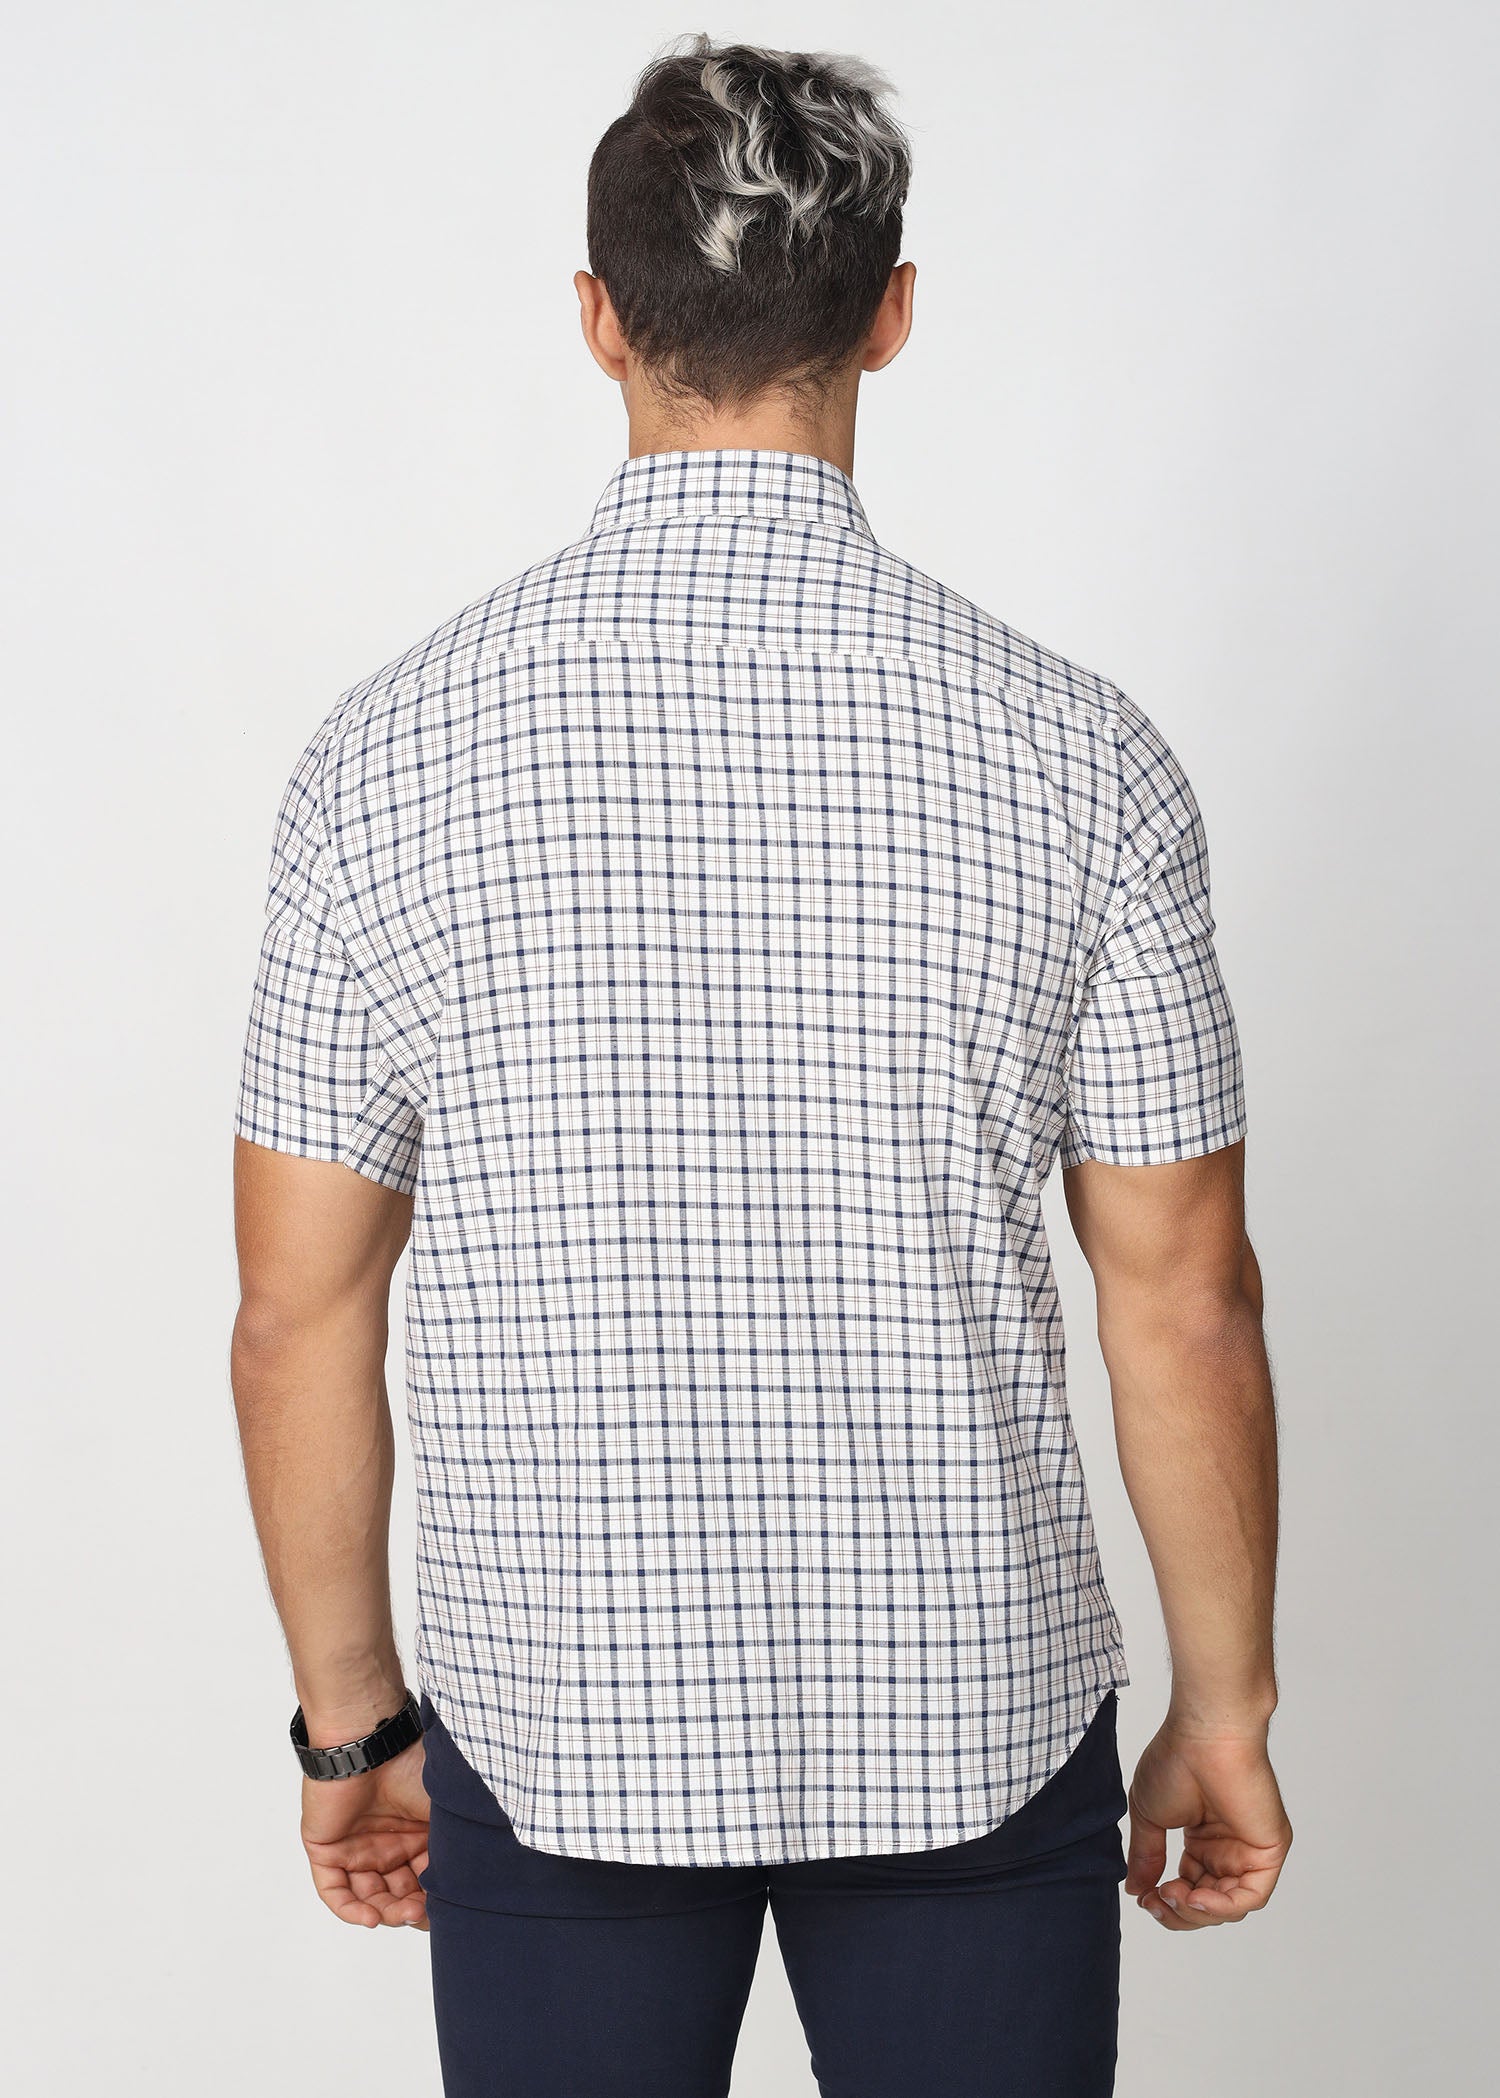 Casual Check S/S Shirt